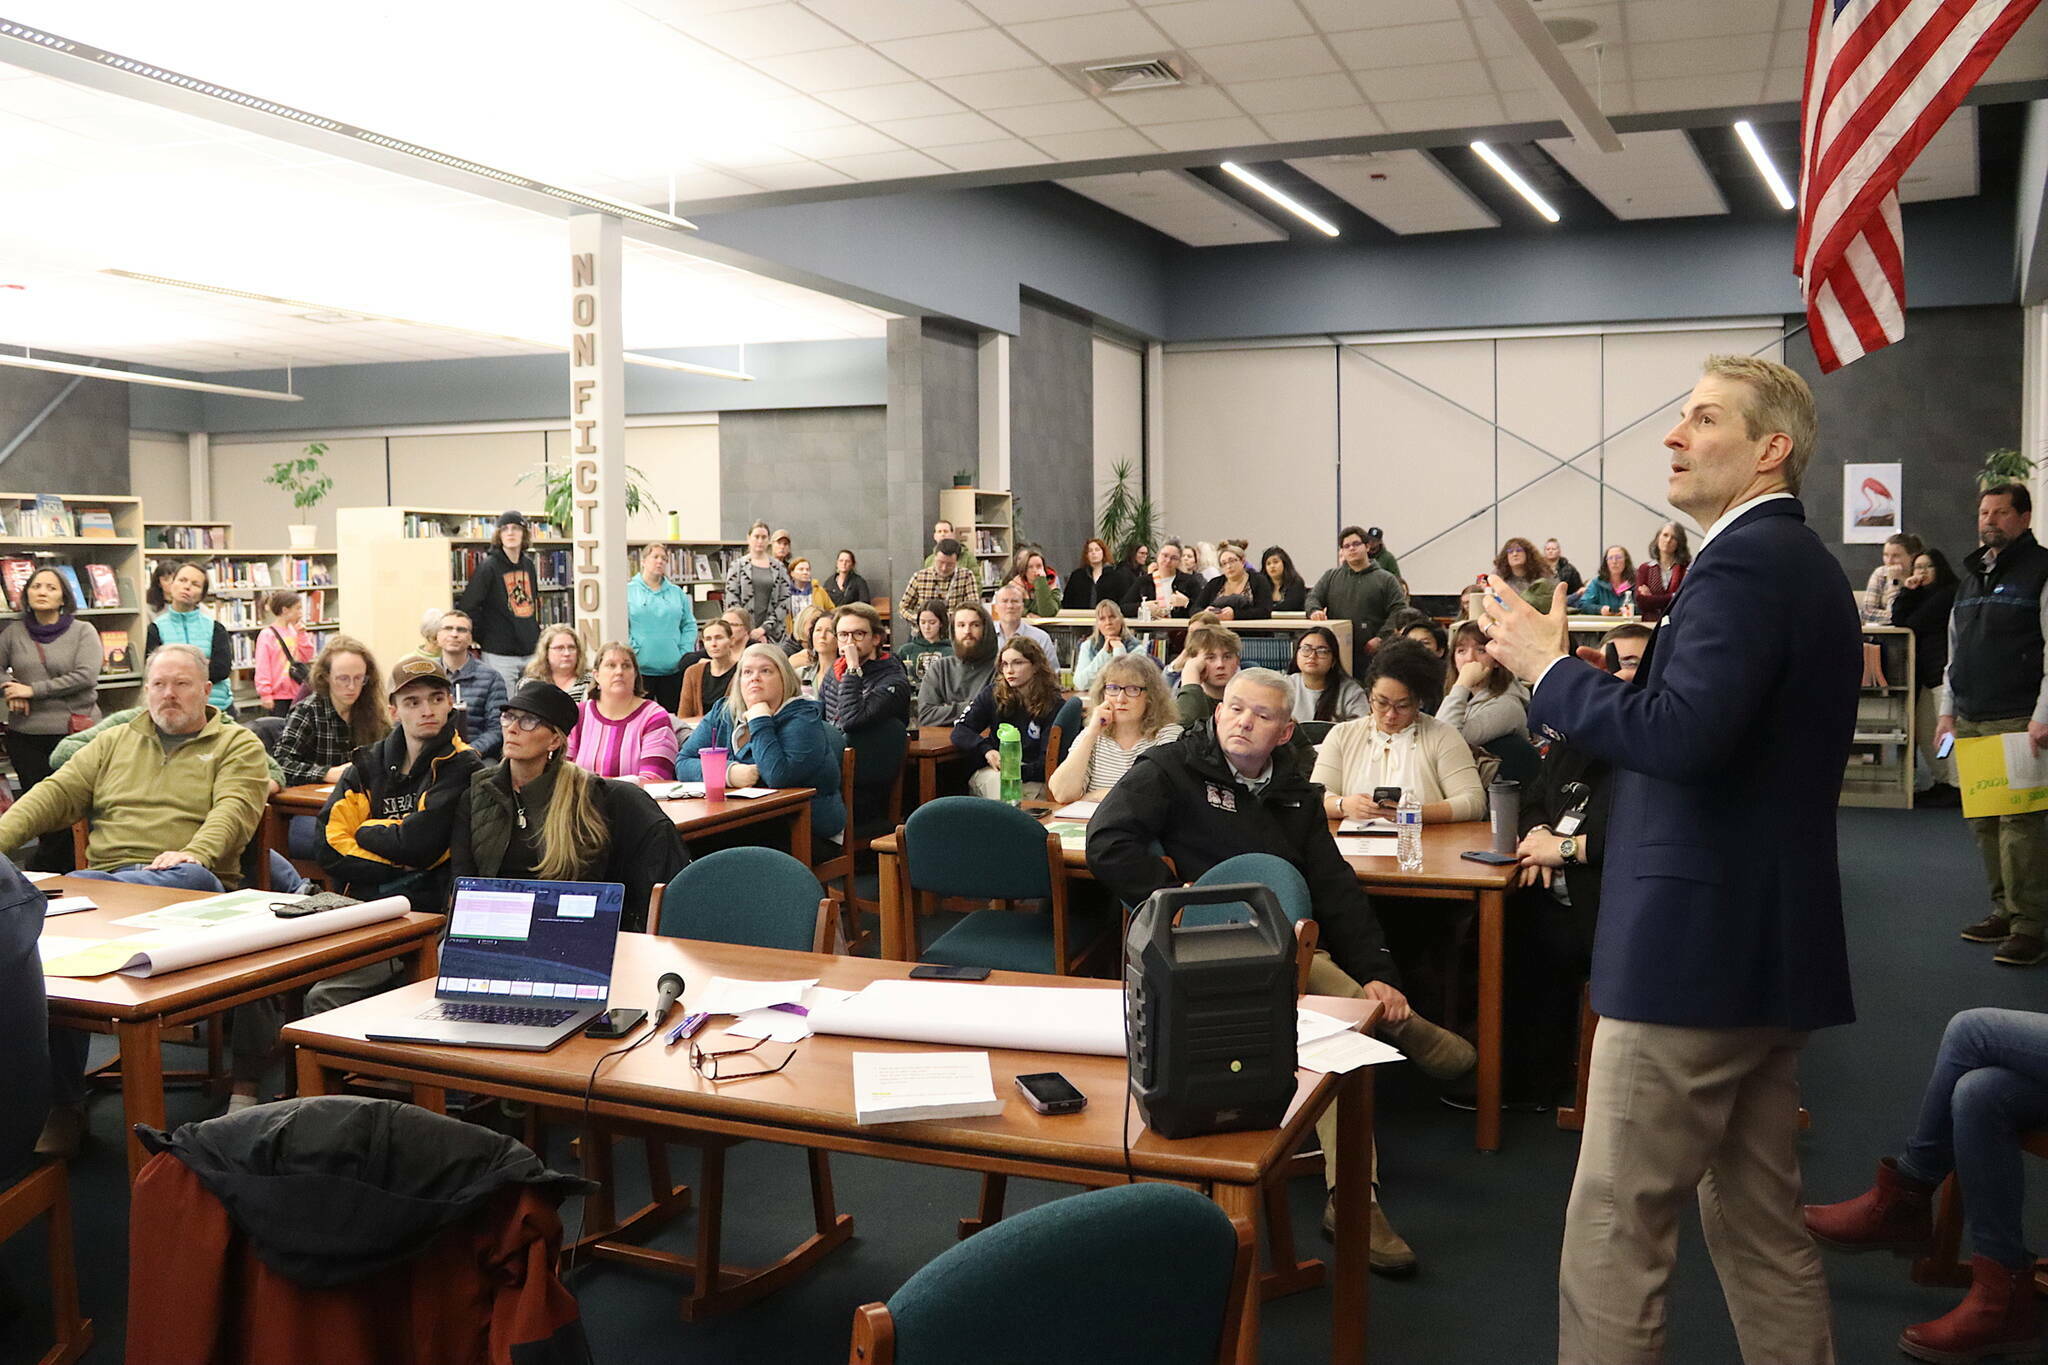 Juneau School District Superintendent Frank Hauser provides an overview of restructuring options being considered during a Community Budget Input Session at Thunder Mountain High School on Jan. 31. (Mark Sabbatini / Juneau Empire file photo)